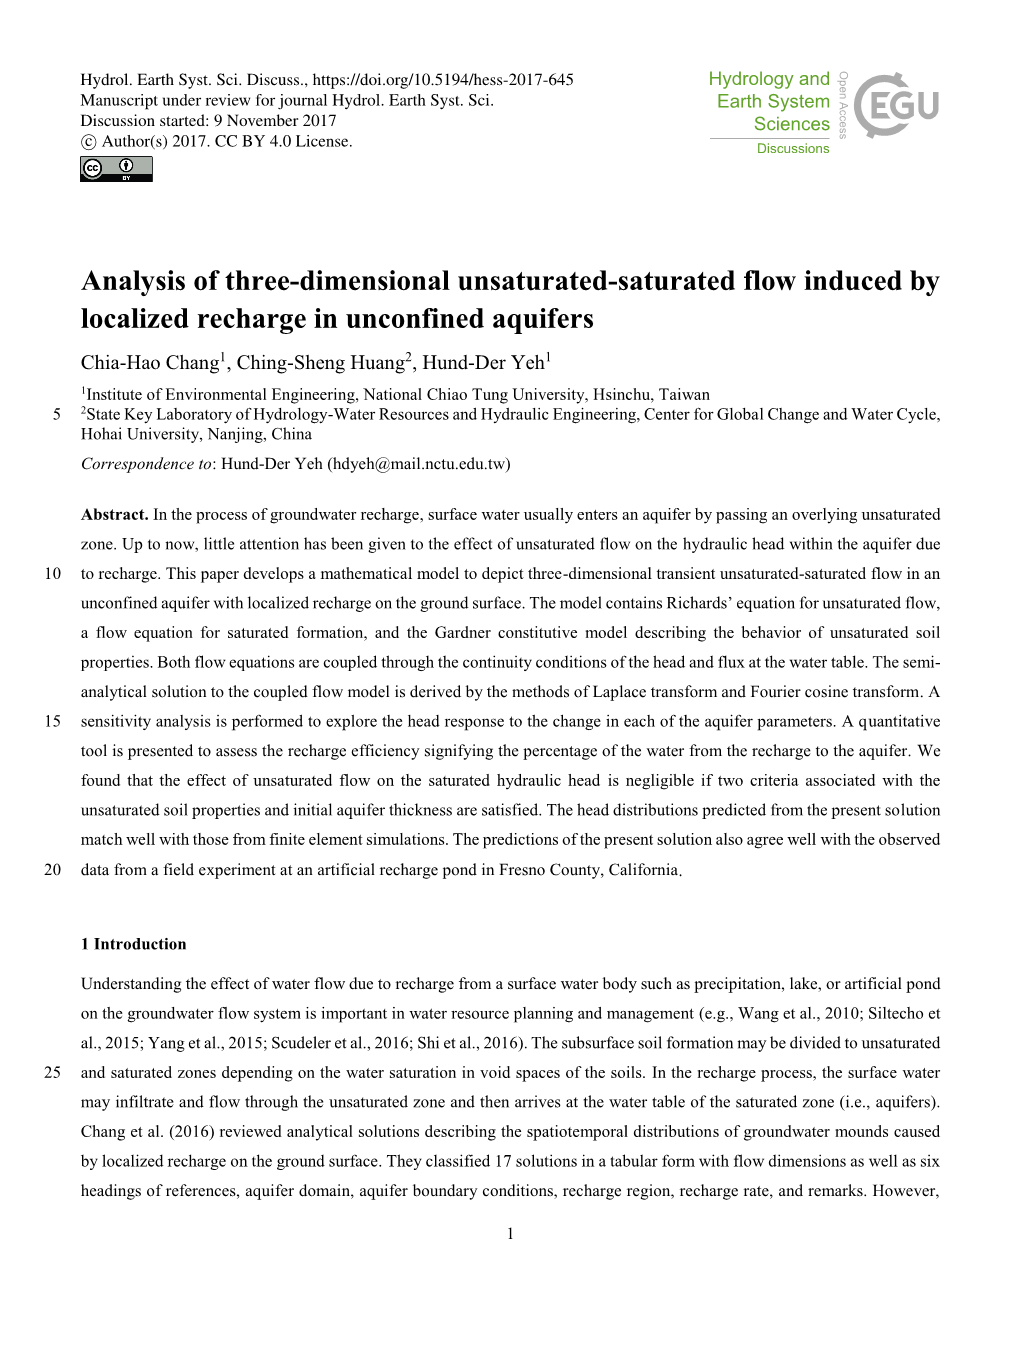 Analysis of Three-Dimensional Unsaturated-Saturated Flow Induced